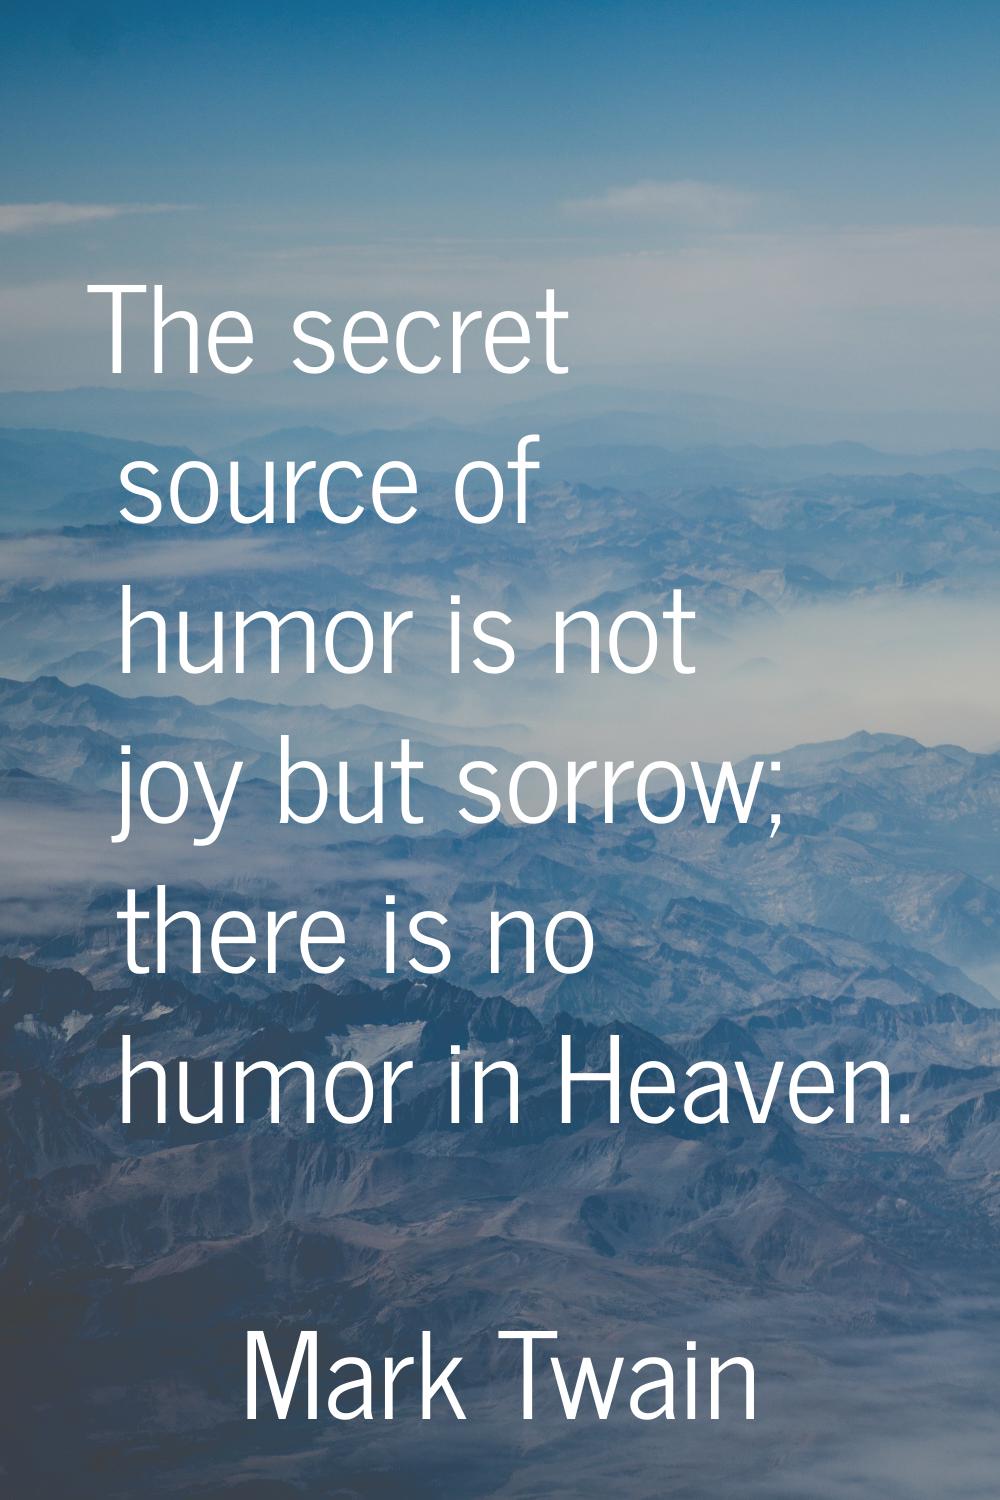 The secret source of humor is not joy but sorrow; there is no humor in Heaven.